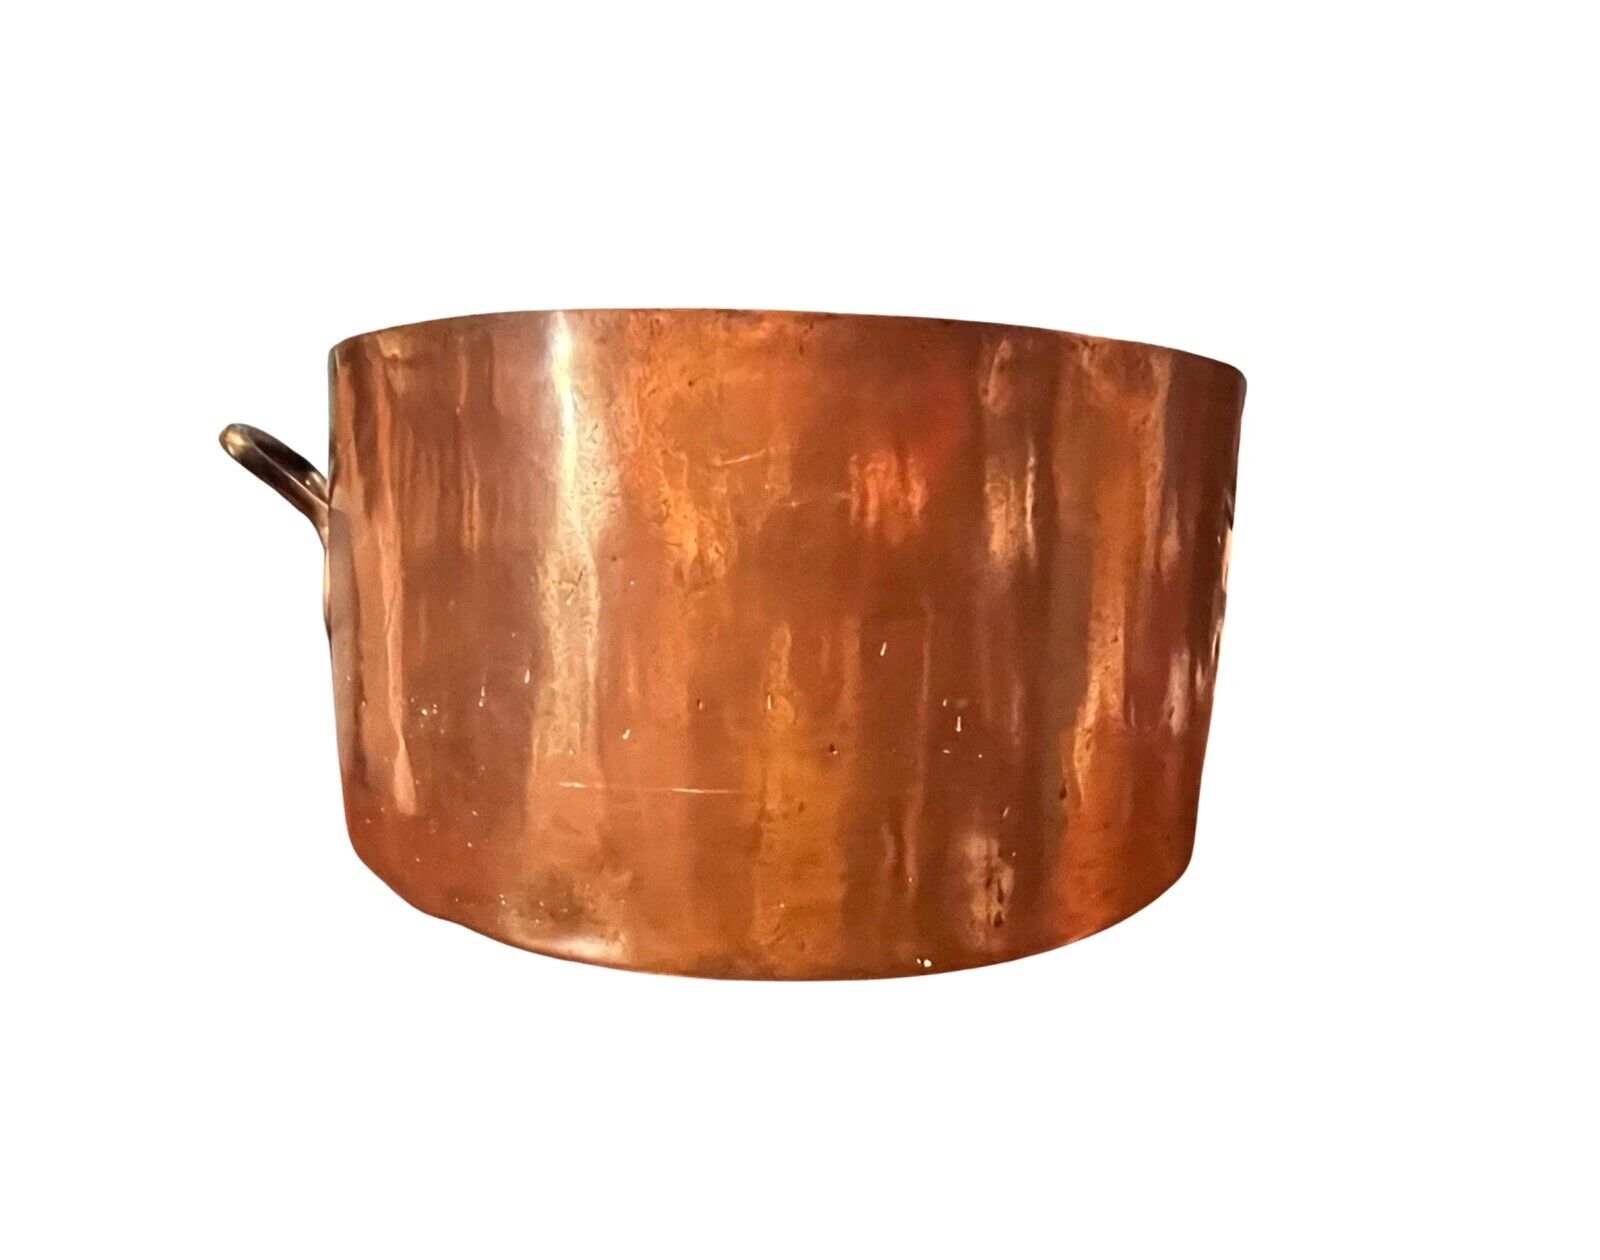 French Stock Pot Copper 15.25” Antique 20+ Lbs 1800s Cookware